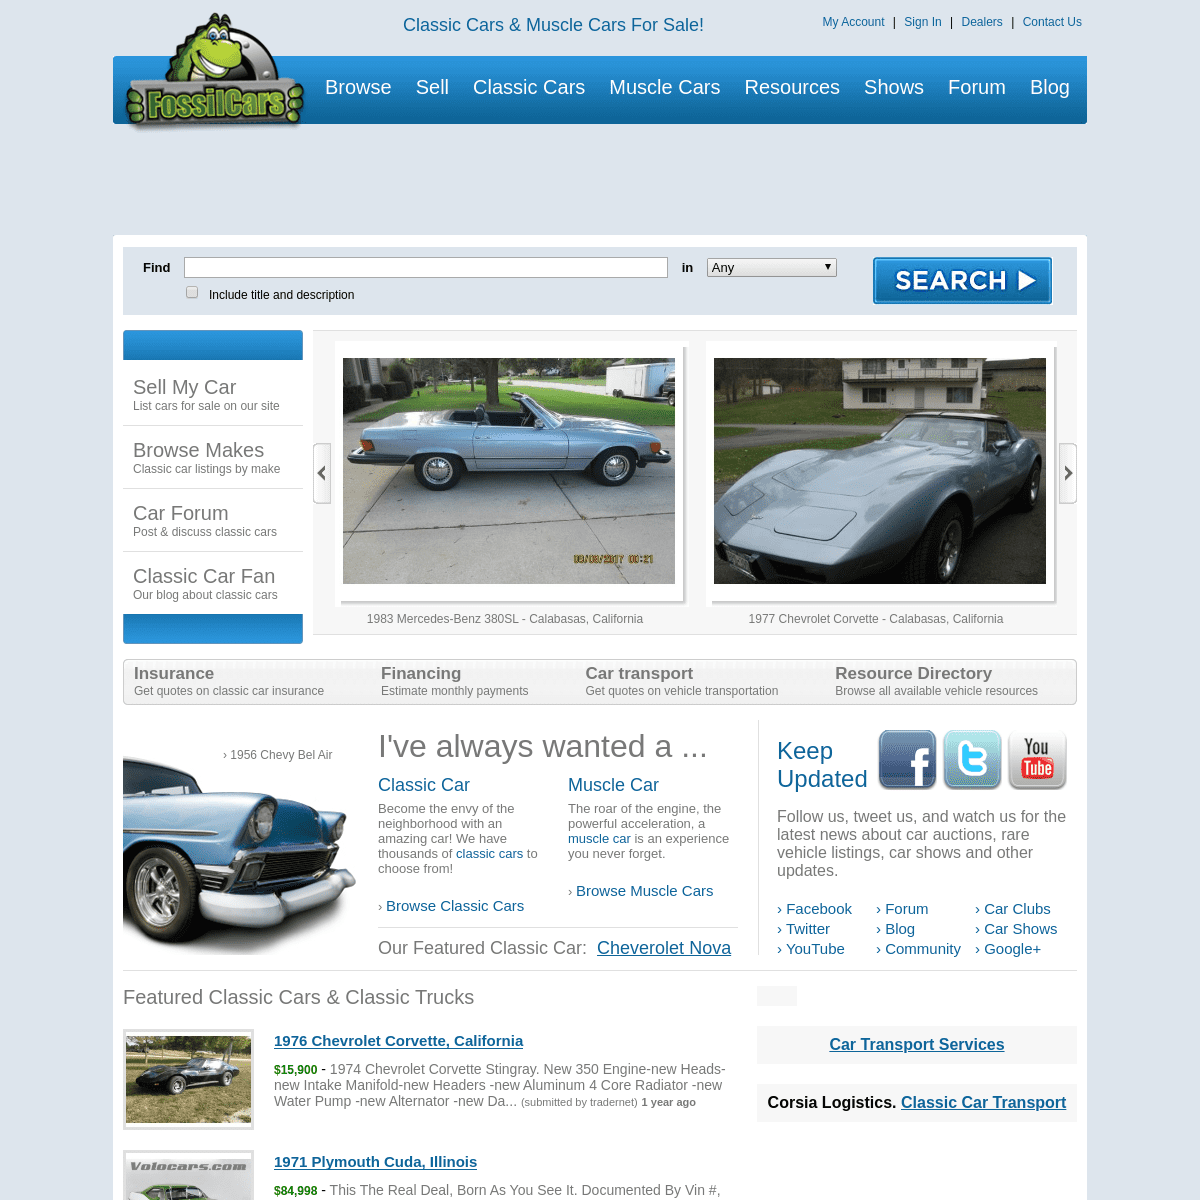 A complete backup of fossilcars.com